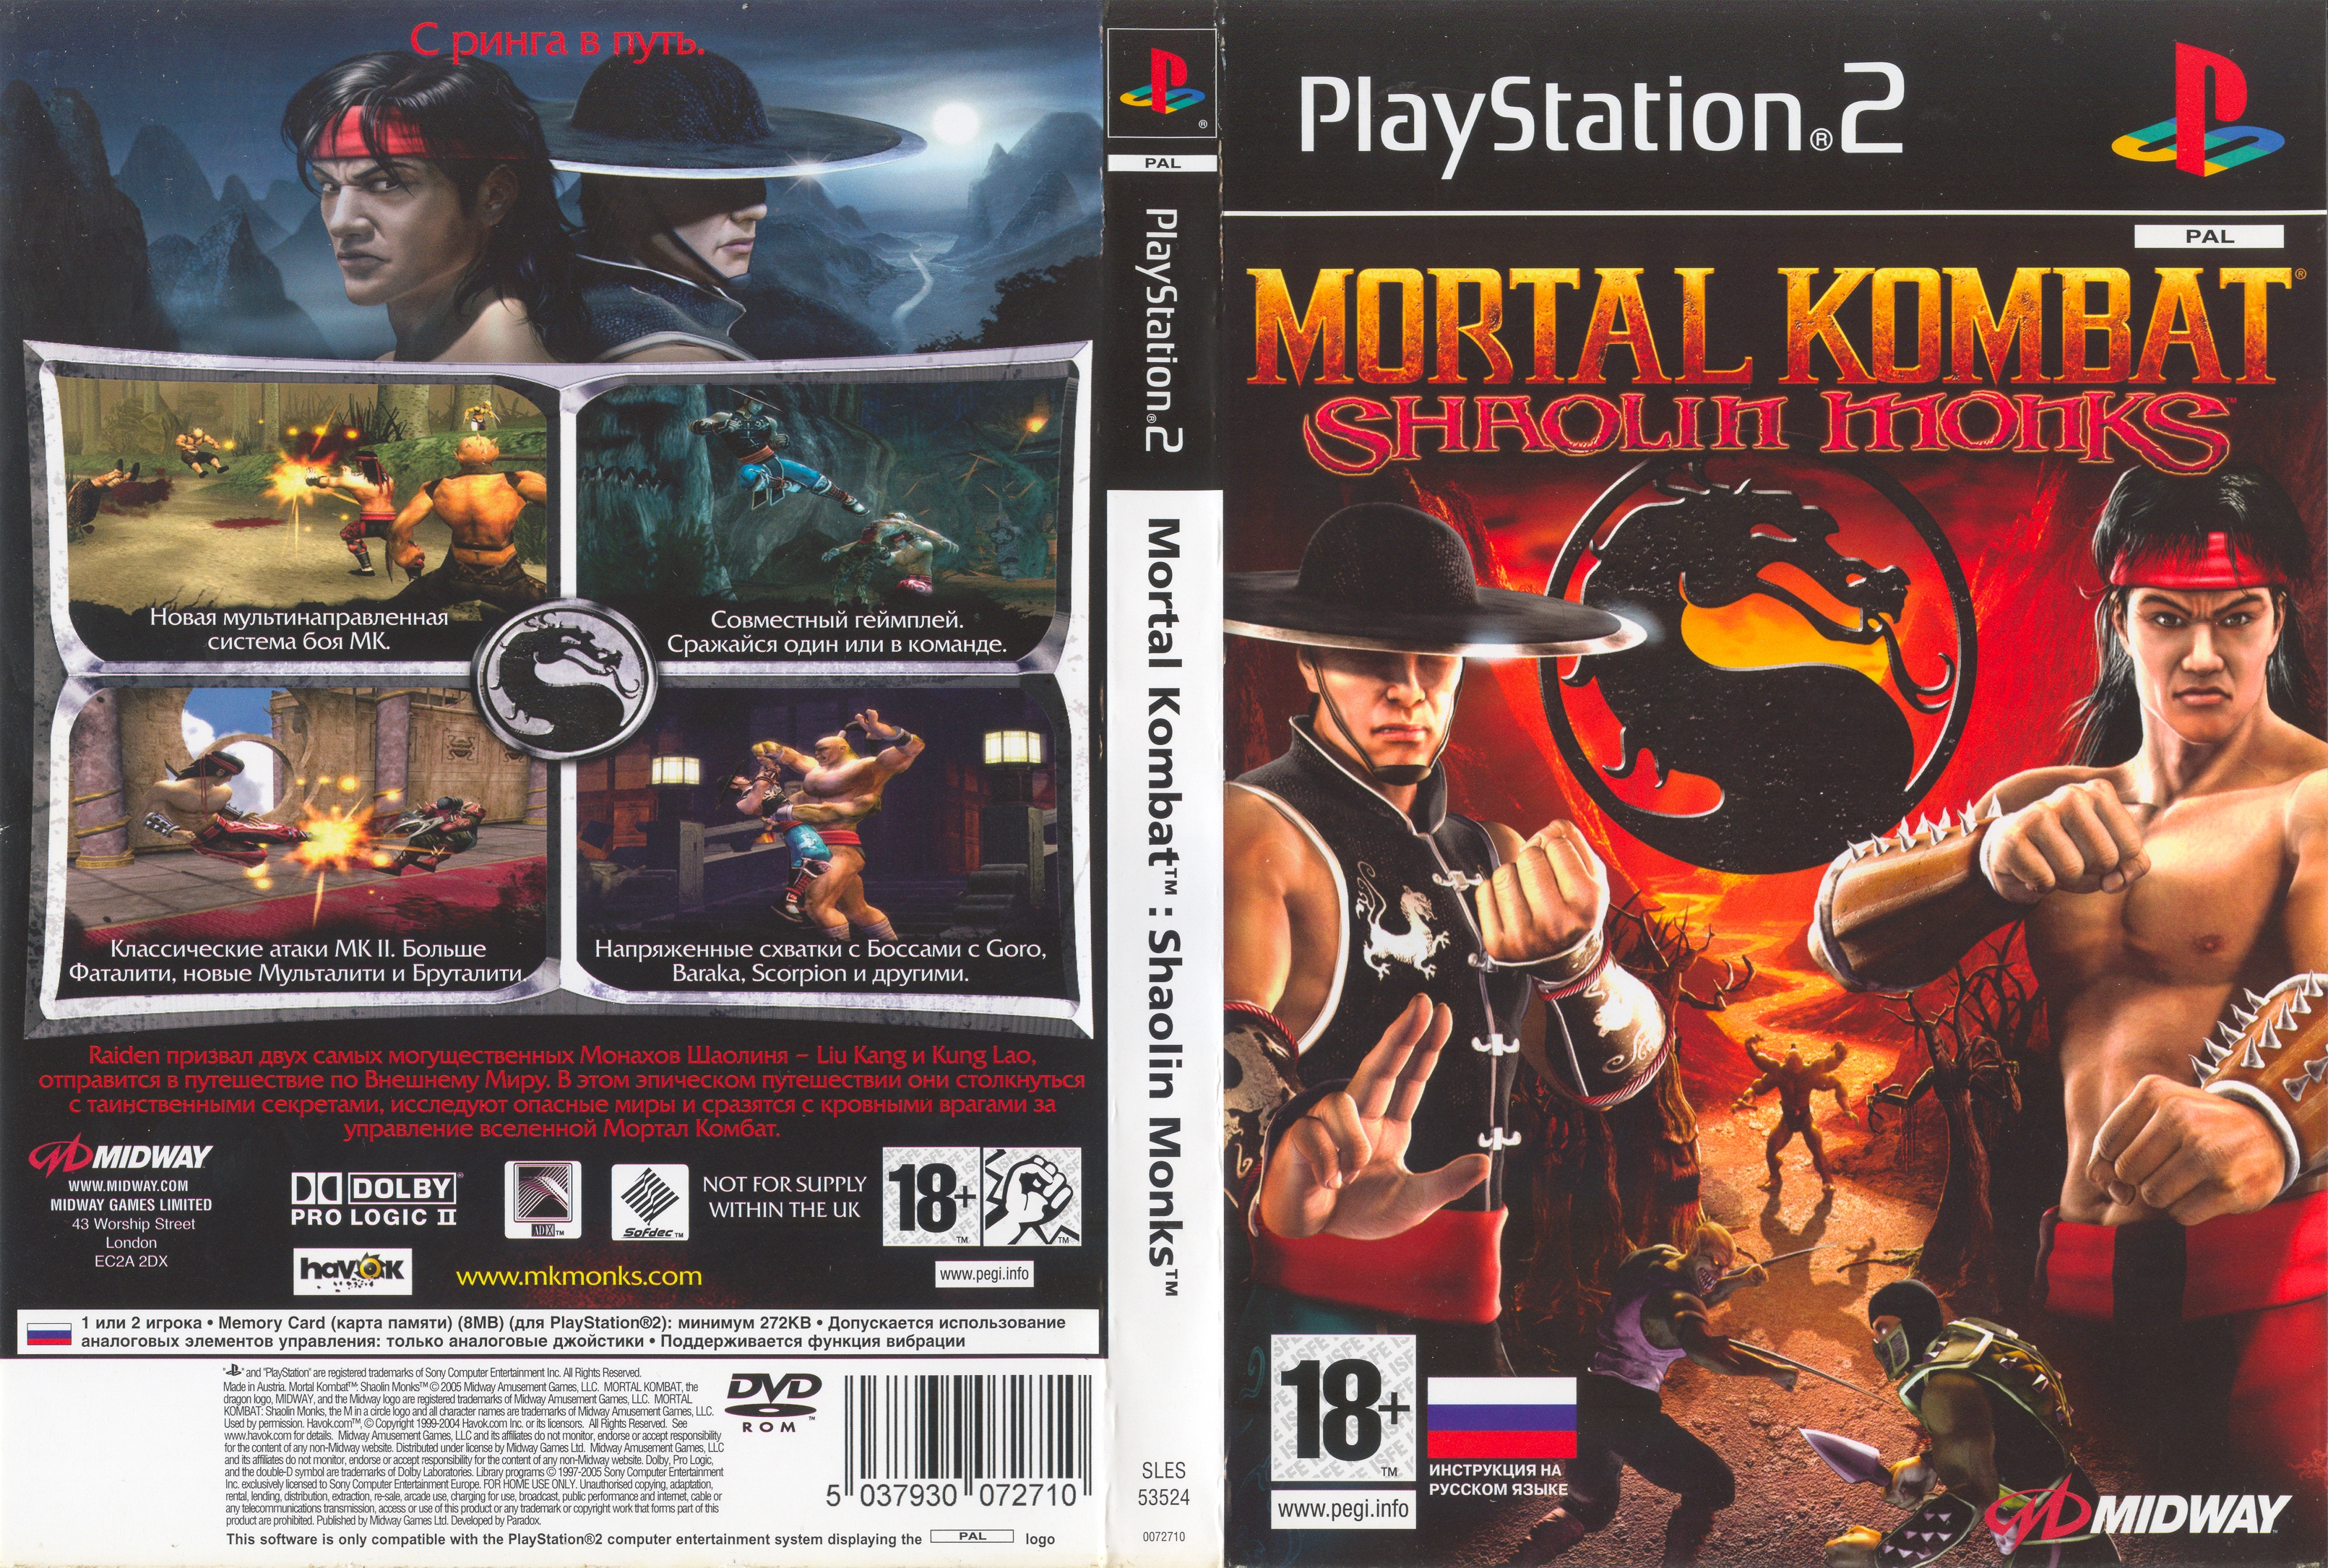 Mortal Kombat - Shaolin Monks [SLUS 21087] (Sony Playstation 2) - Box Scans  (1200DPI) : Midway : Free Download, Borrow, and Streaming : Internet Archive